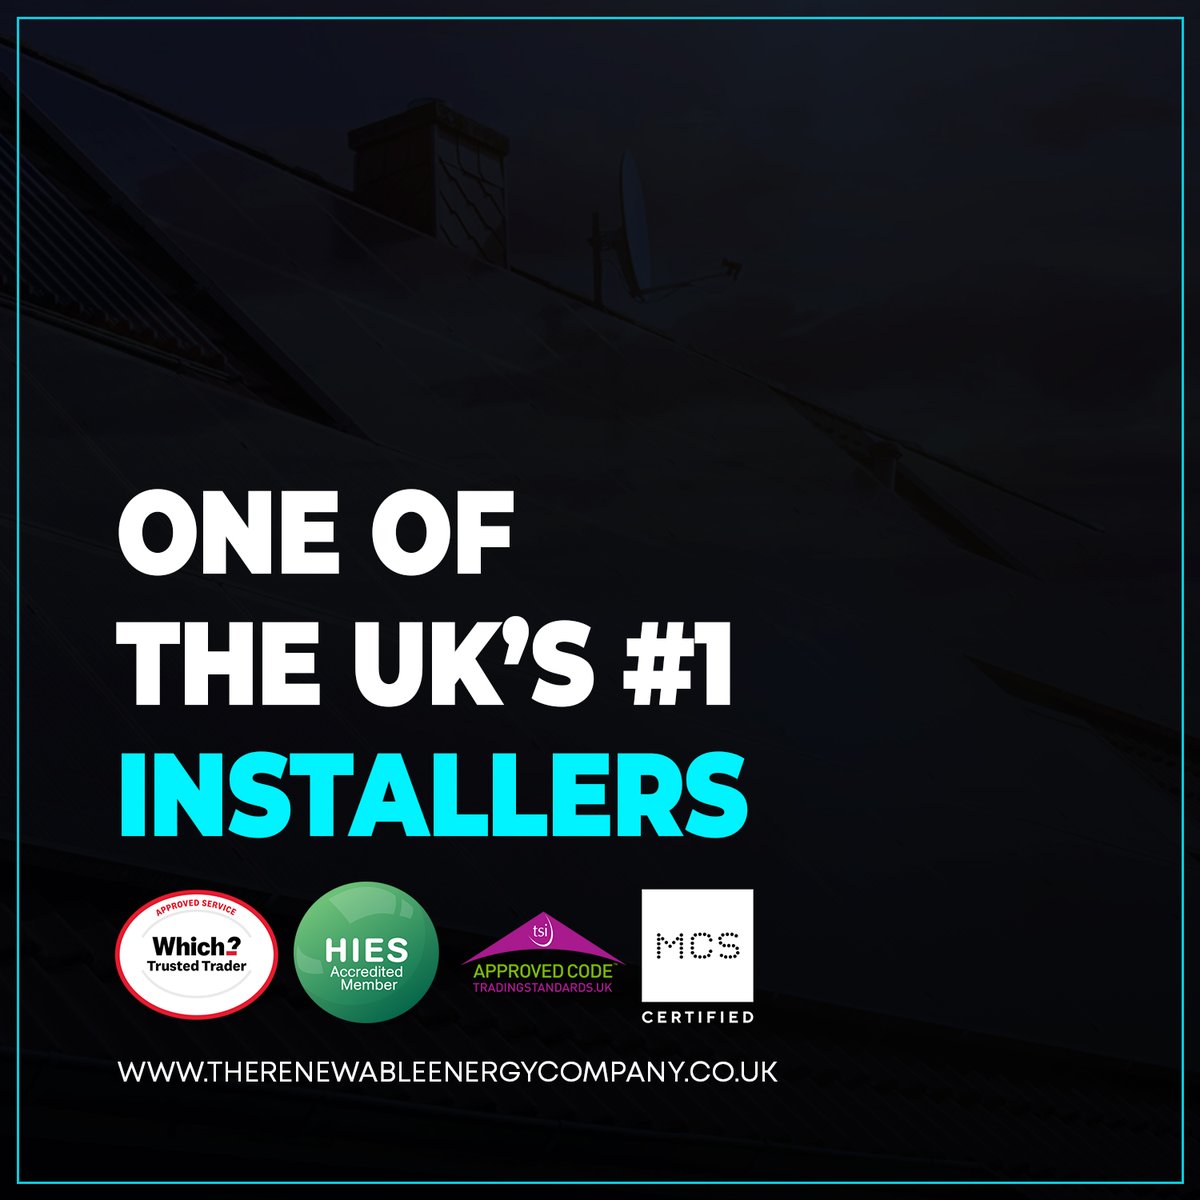 We Are Proud To Be One Of The Highest Accredited Installers Across The UK ✅

#whichtrustedtrader #hies #MCS #therenewableenergycompany